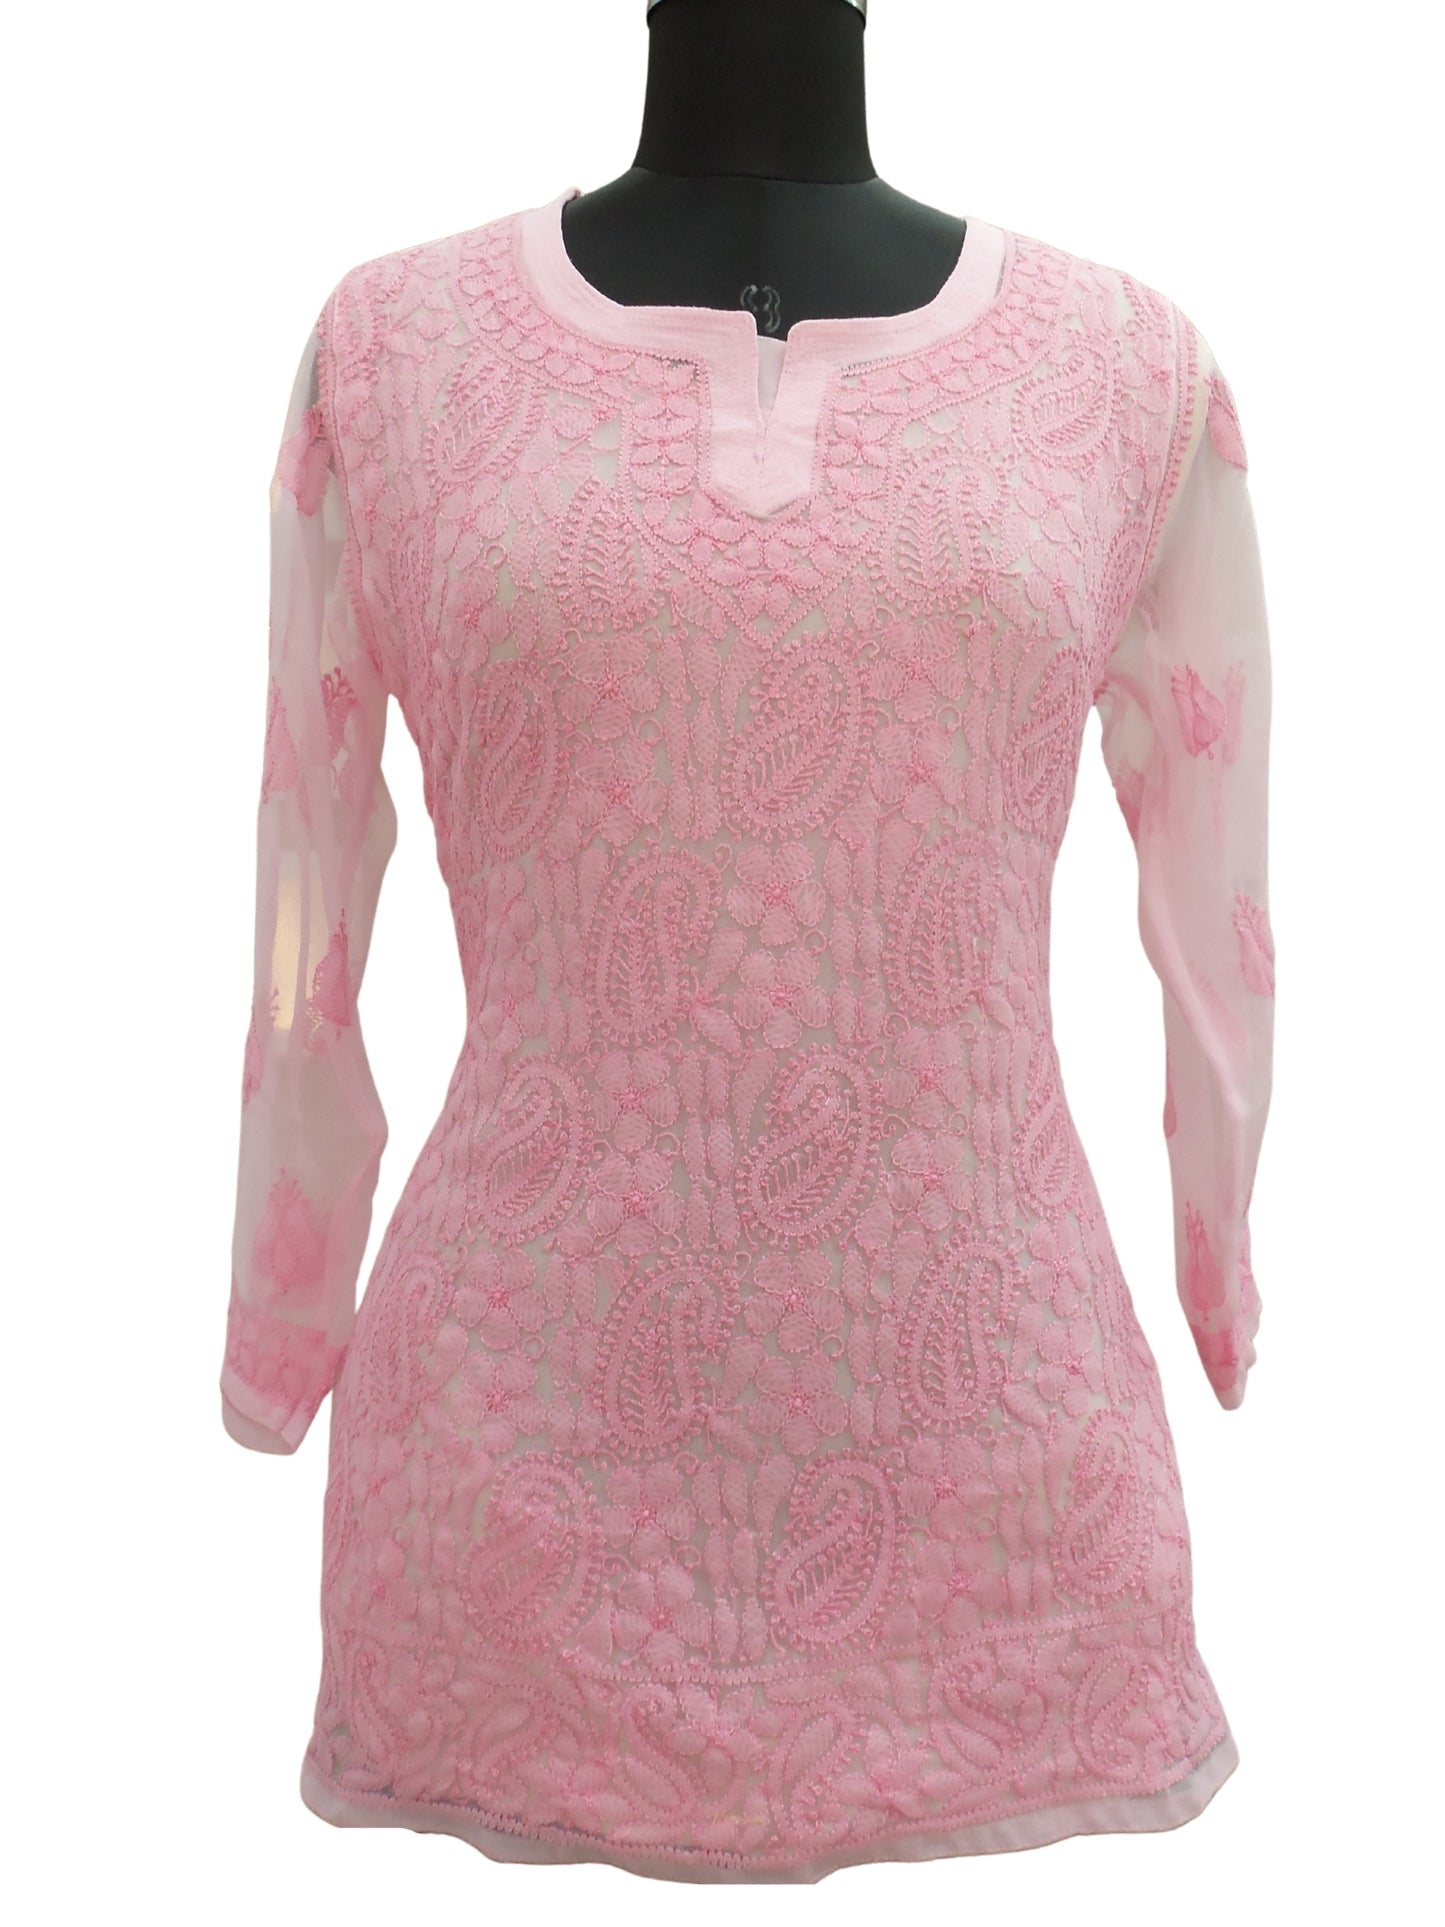 Shyamal Chikan Hand Embroidered Pink Georgette Lucknowi Chikankari Short Top- S4331